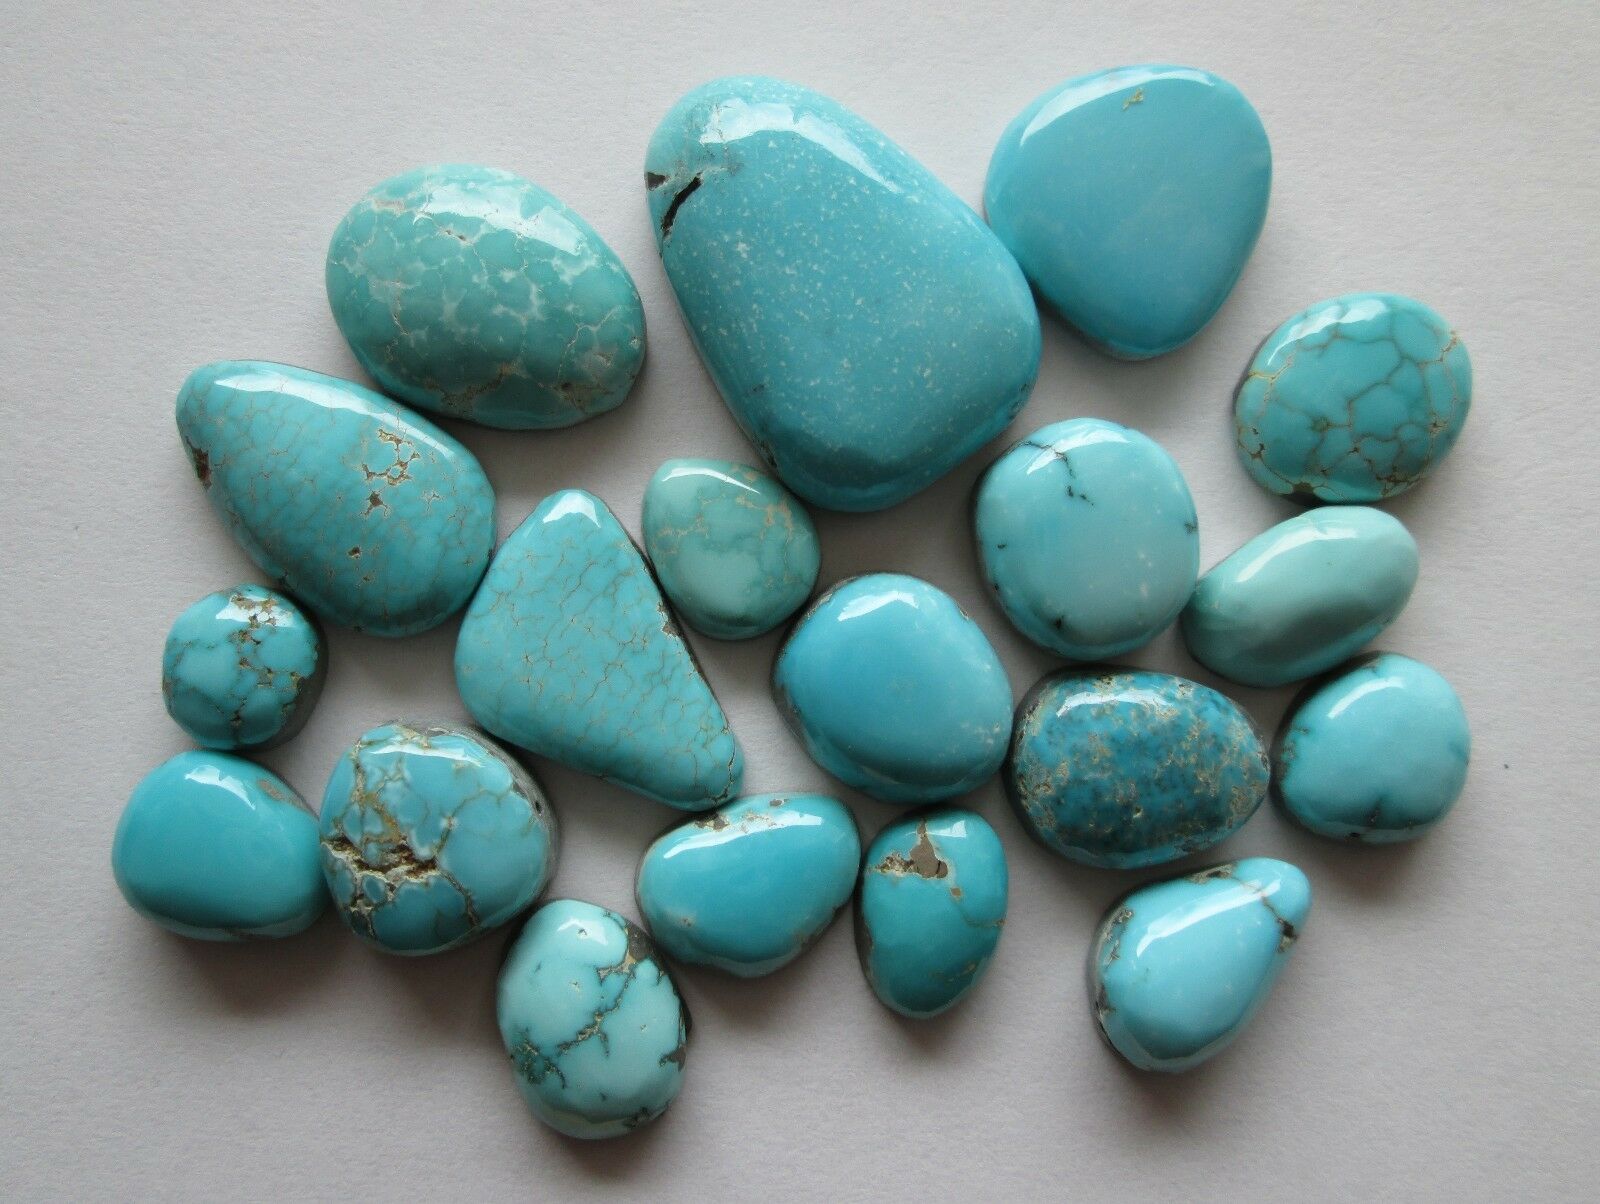 168.50 Cts Of Natural Lone Mountain Turquoise Gemstones, # Dt 1075